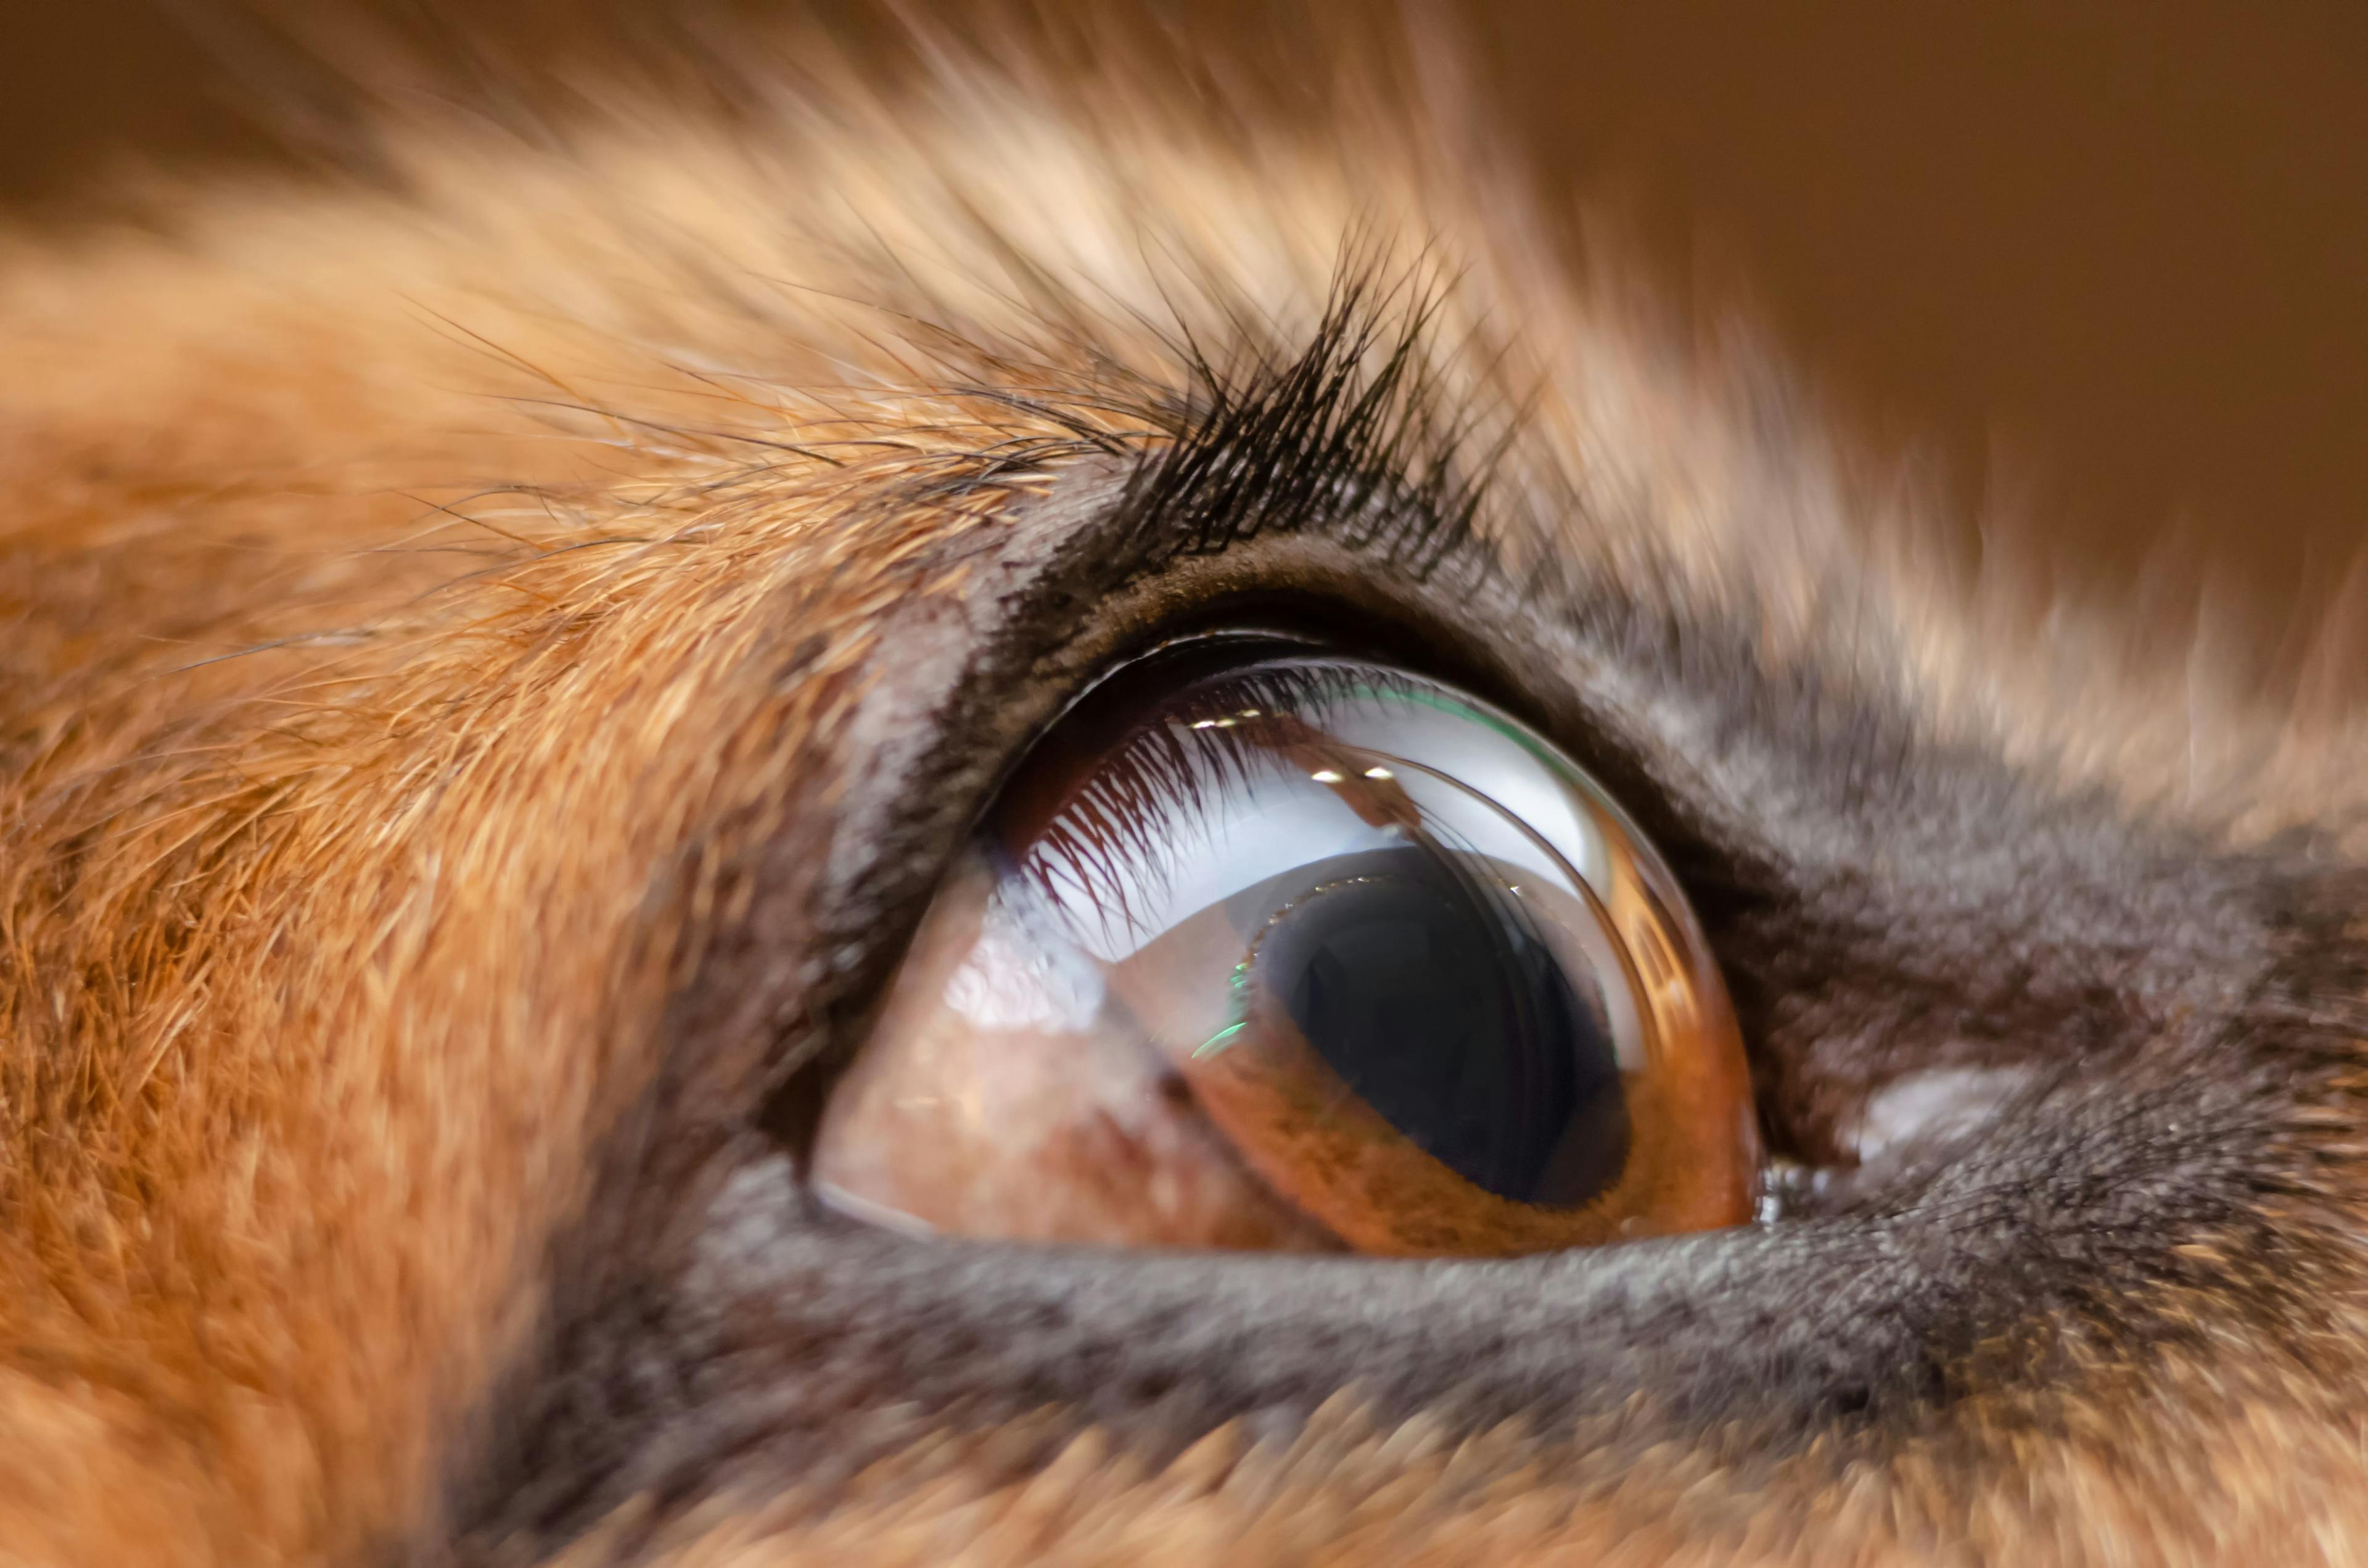 Registration open for 2022 ACVO and Epicur Service Animal Eye Exam event